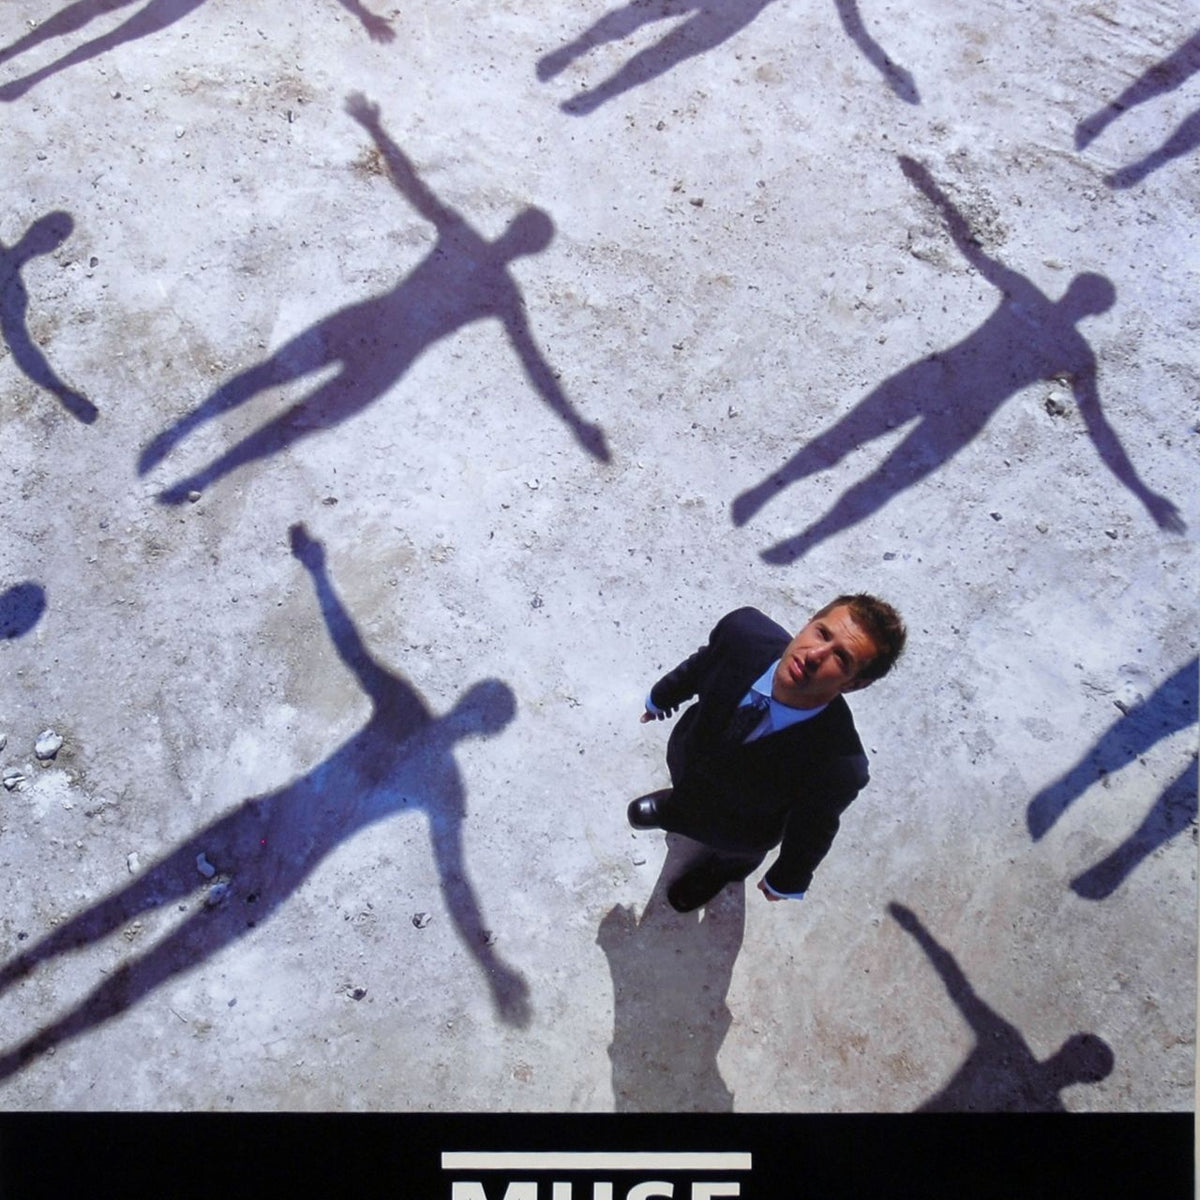 Cover Story - Muse's Absolution album artwork